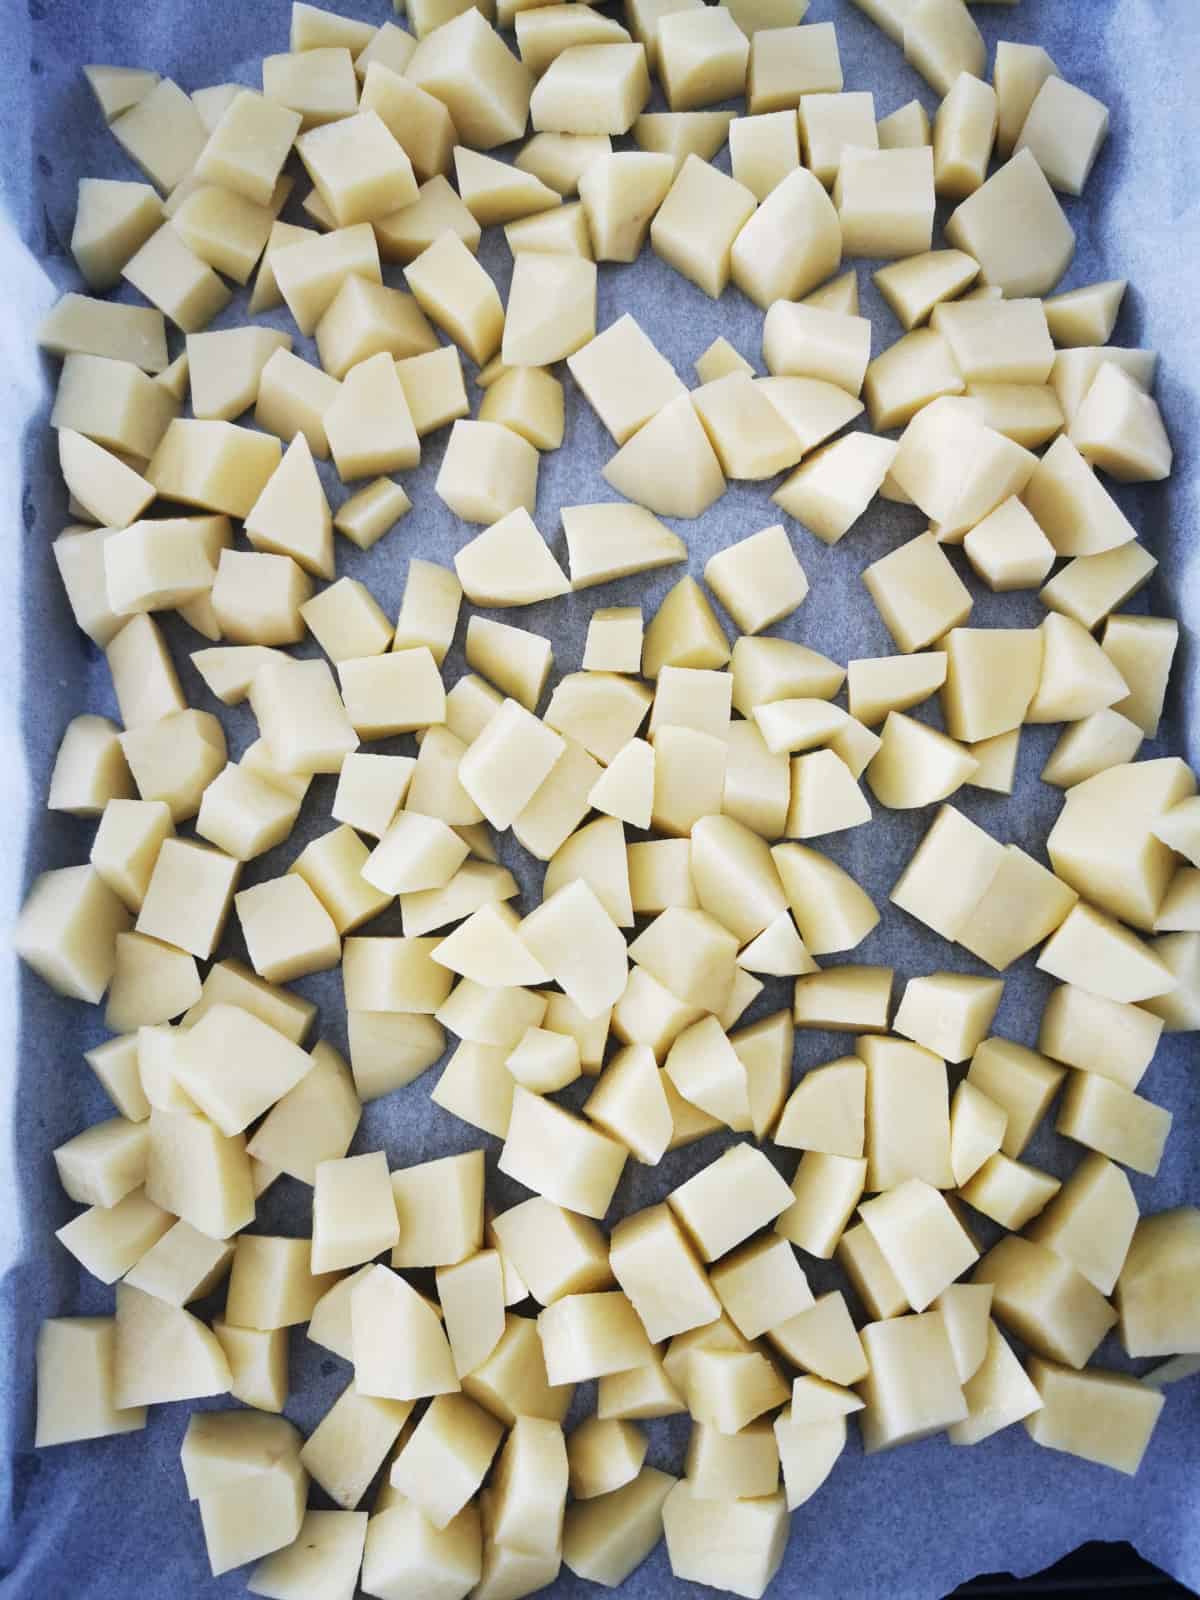 Peeled and cut Potato Cubes placed on parchment lined baking sheet